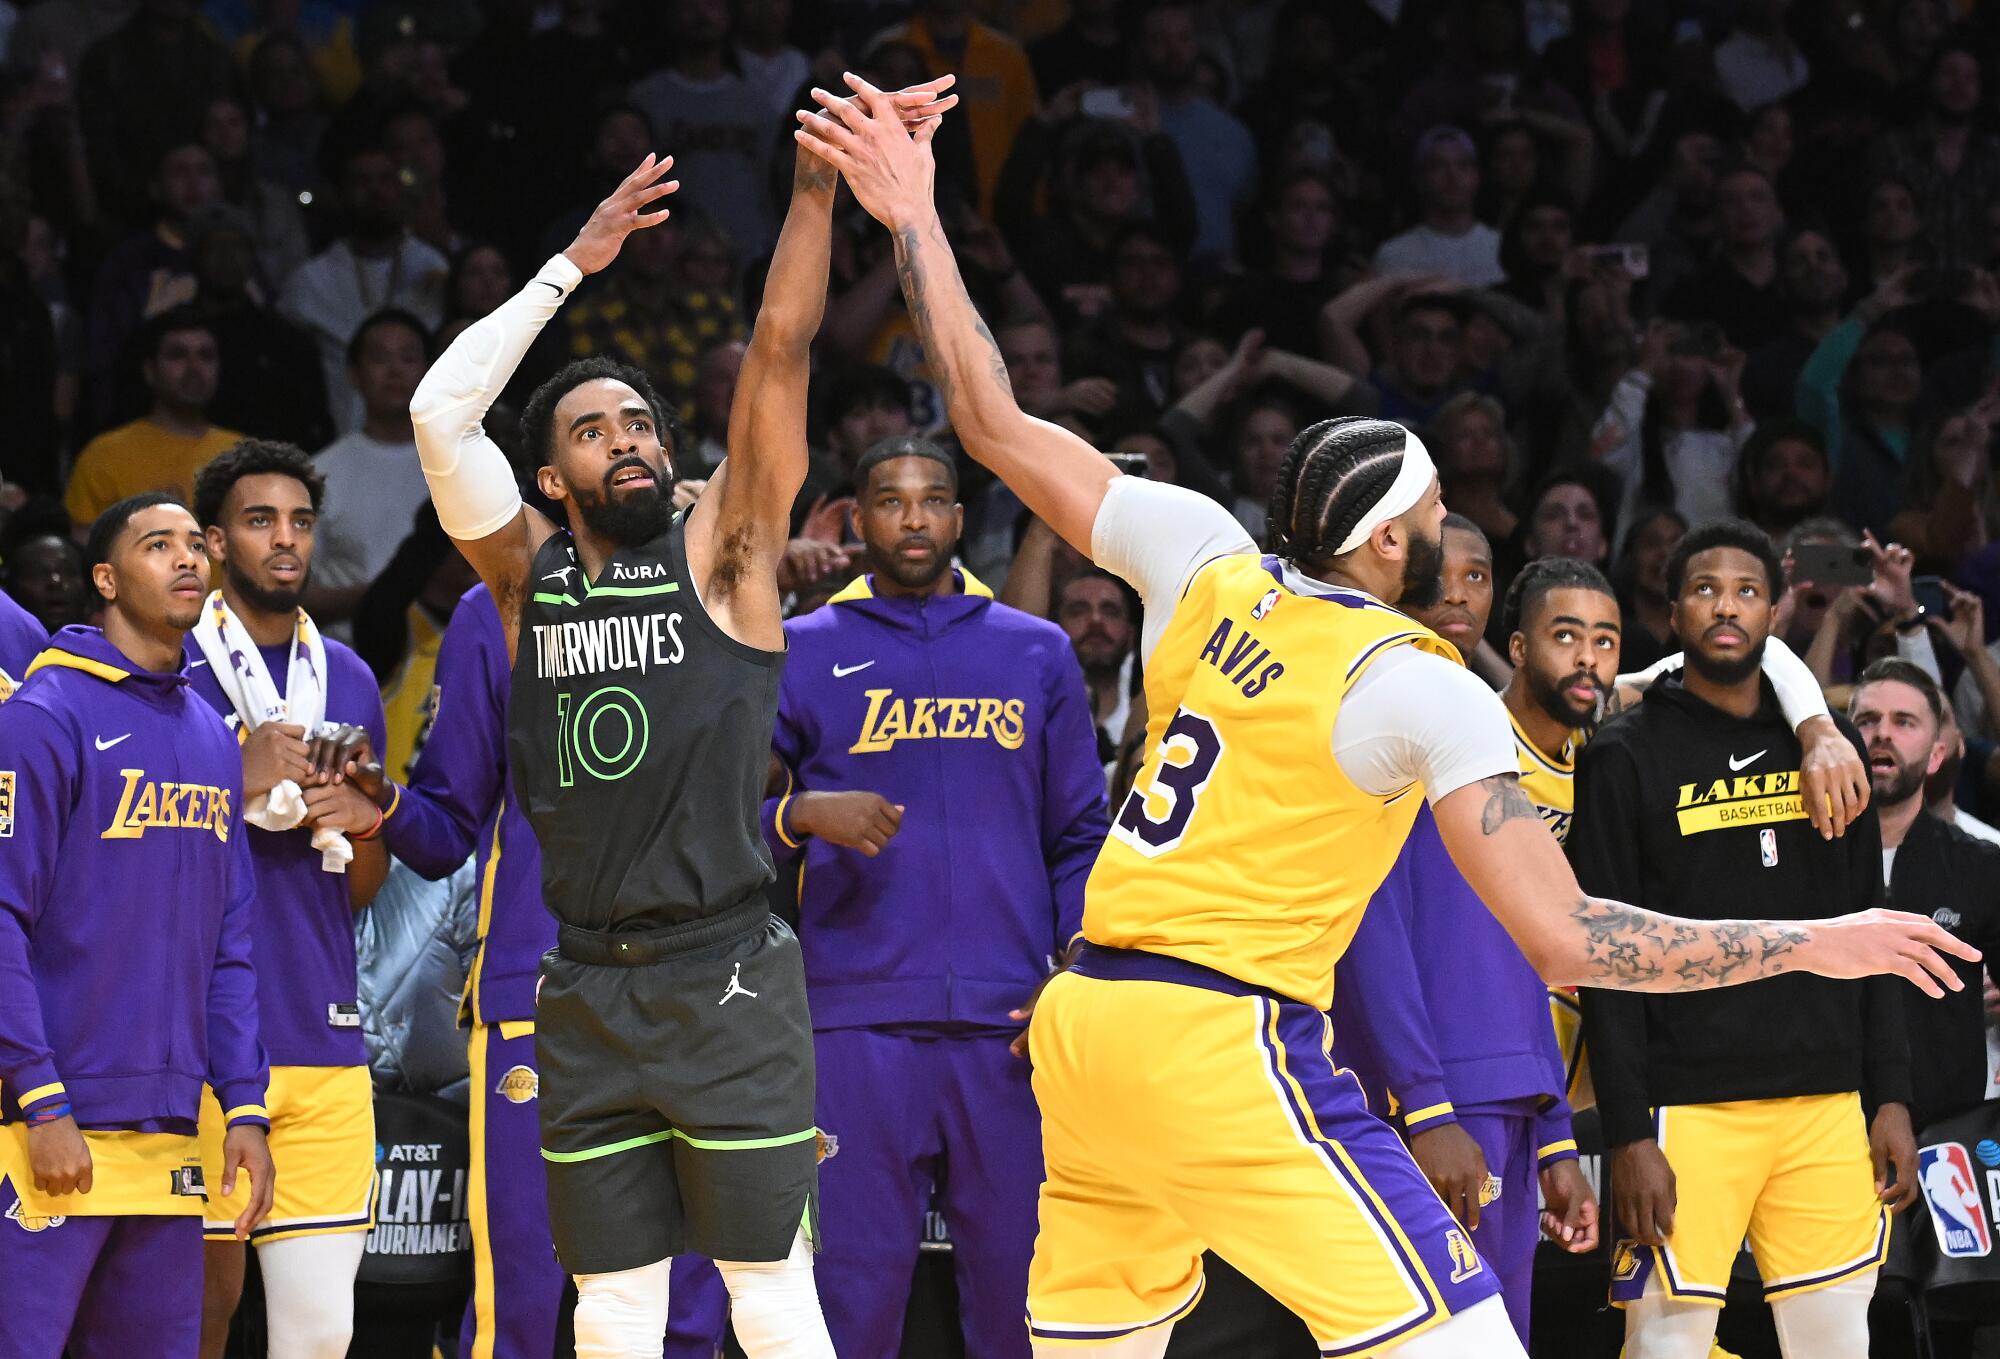 Lakers forward Anthony Davis fouls Timberwolves guard Mike Conley on a three-point attempt.